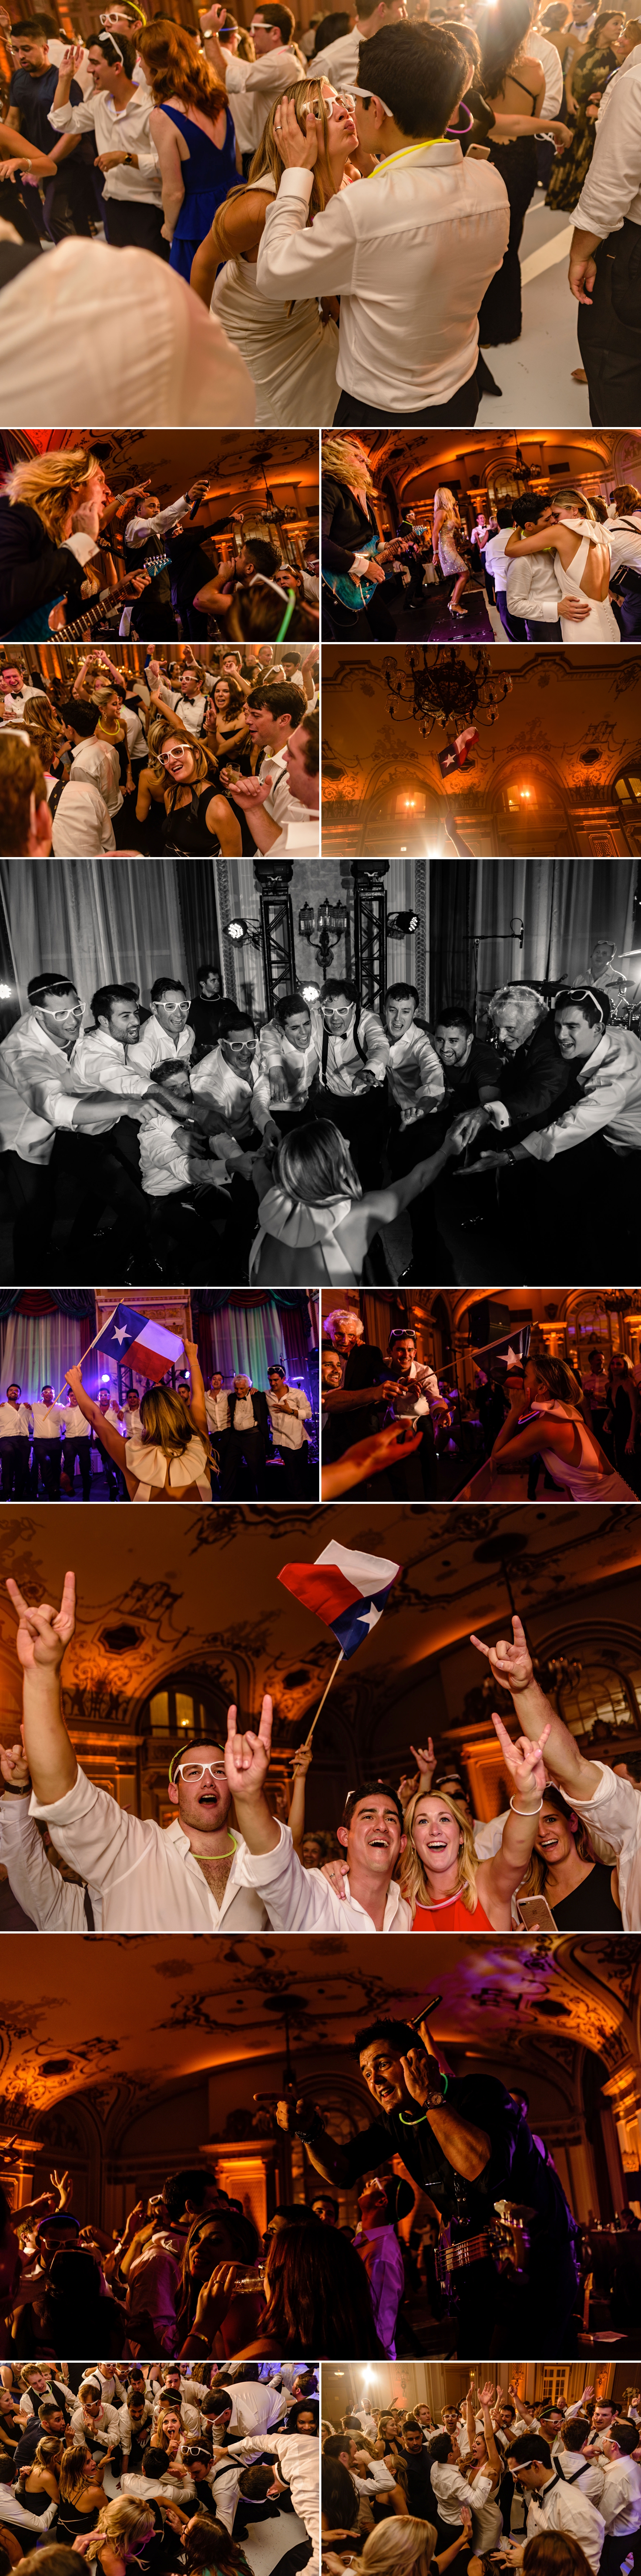 photos of candid moments on the dance floor during a jewish wedding at the chateau laurier wedding in ottawa ontario